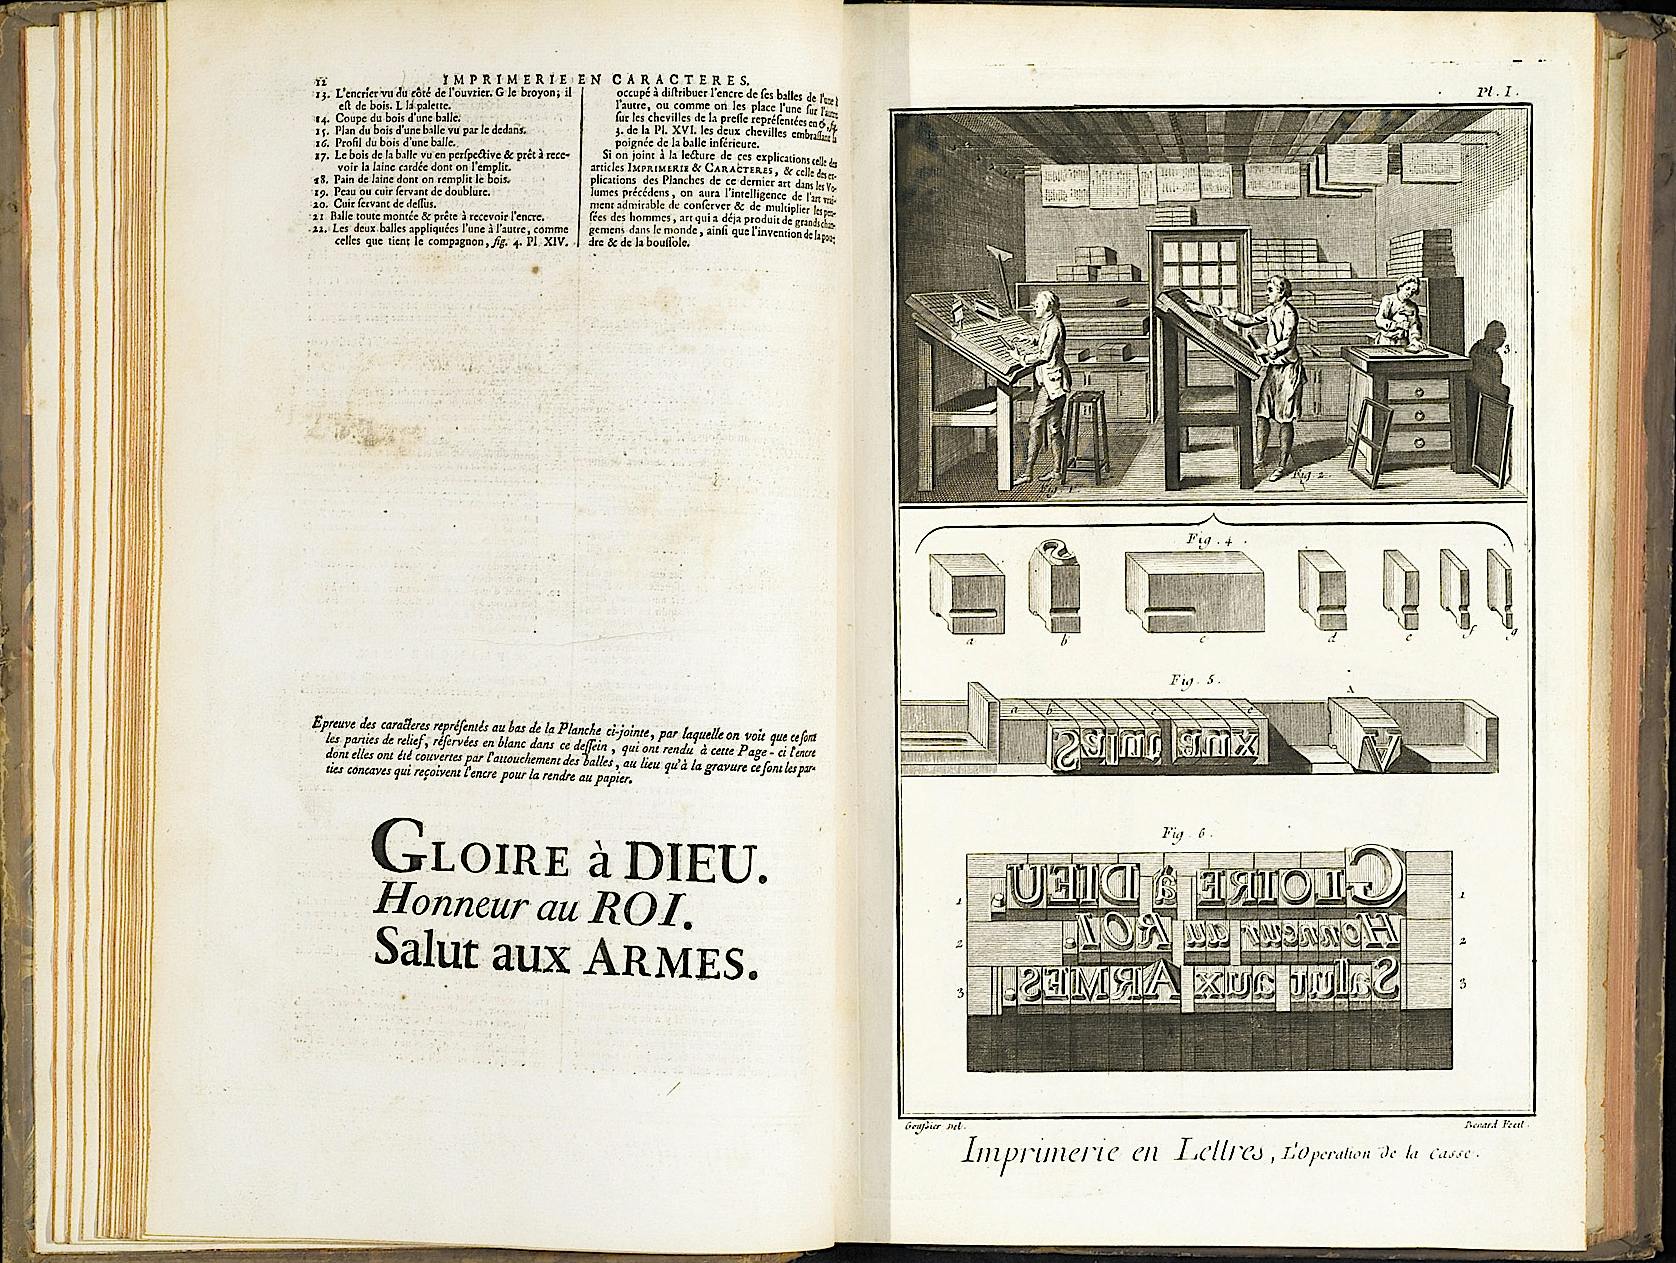 Fournier’s “Printing types” article in the Diderot et d’Alembert’s 1751 “Encyclopédie”